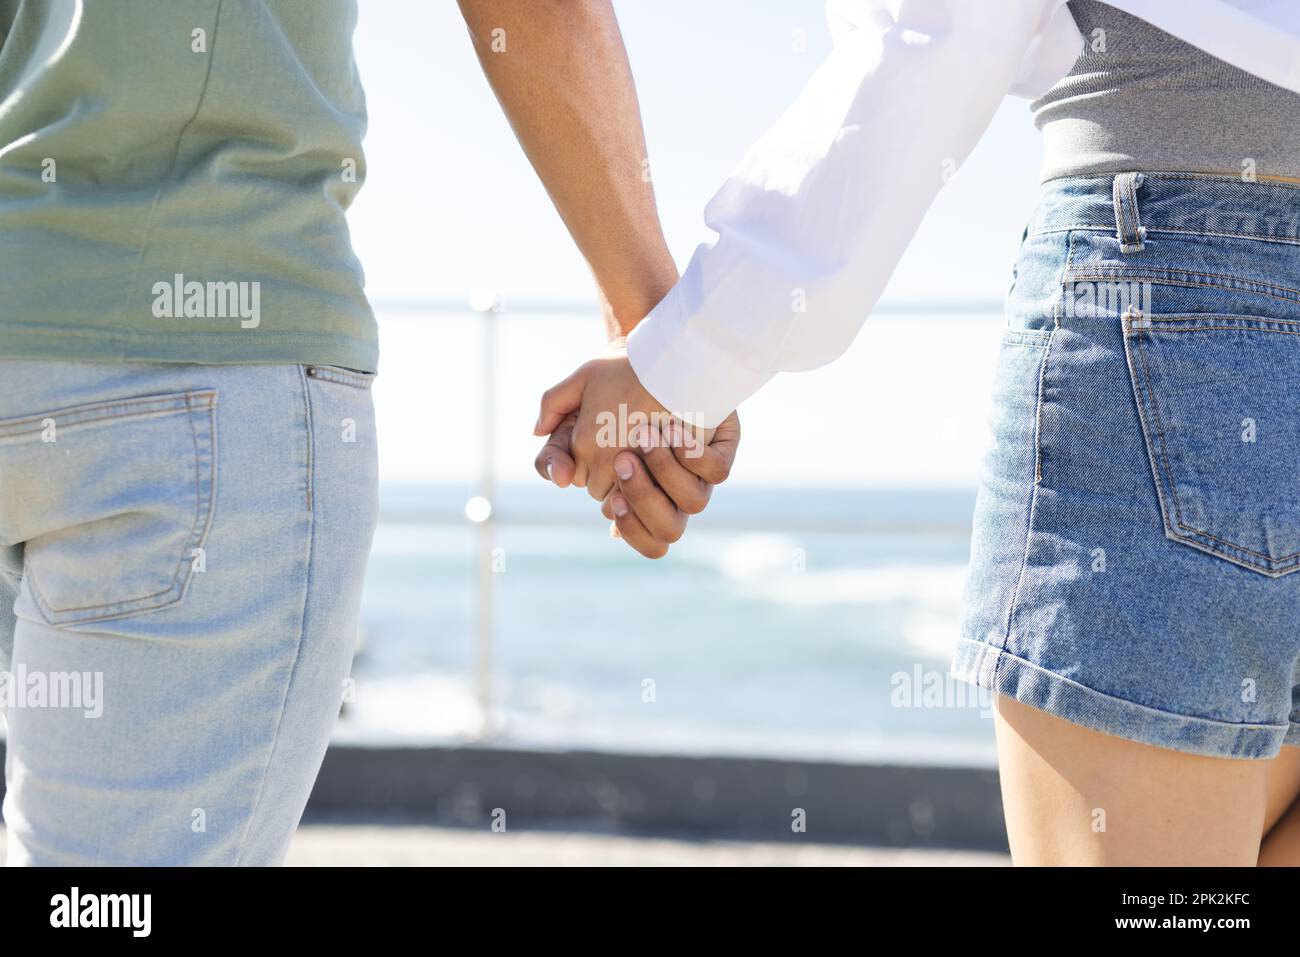 Midsection of diverse couple holding hands on promenade by the sea Stock Photo